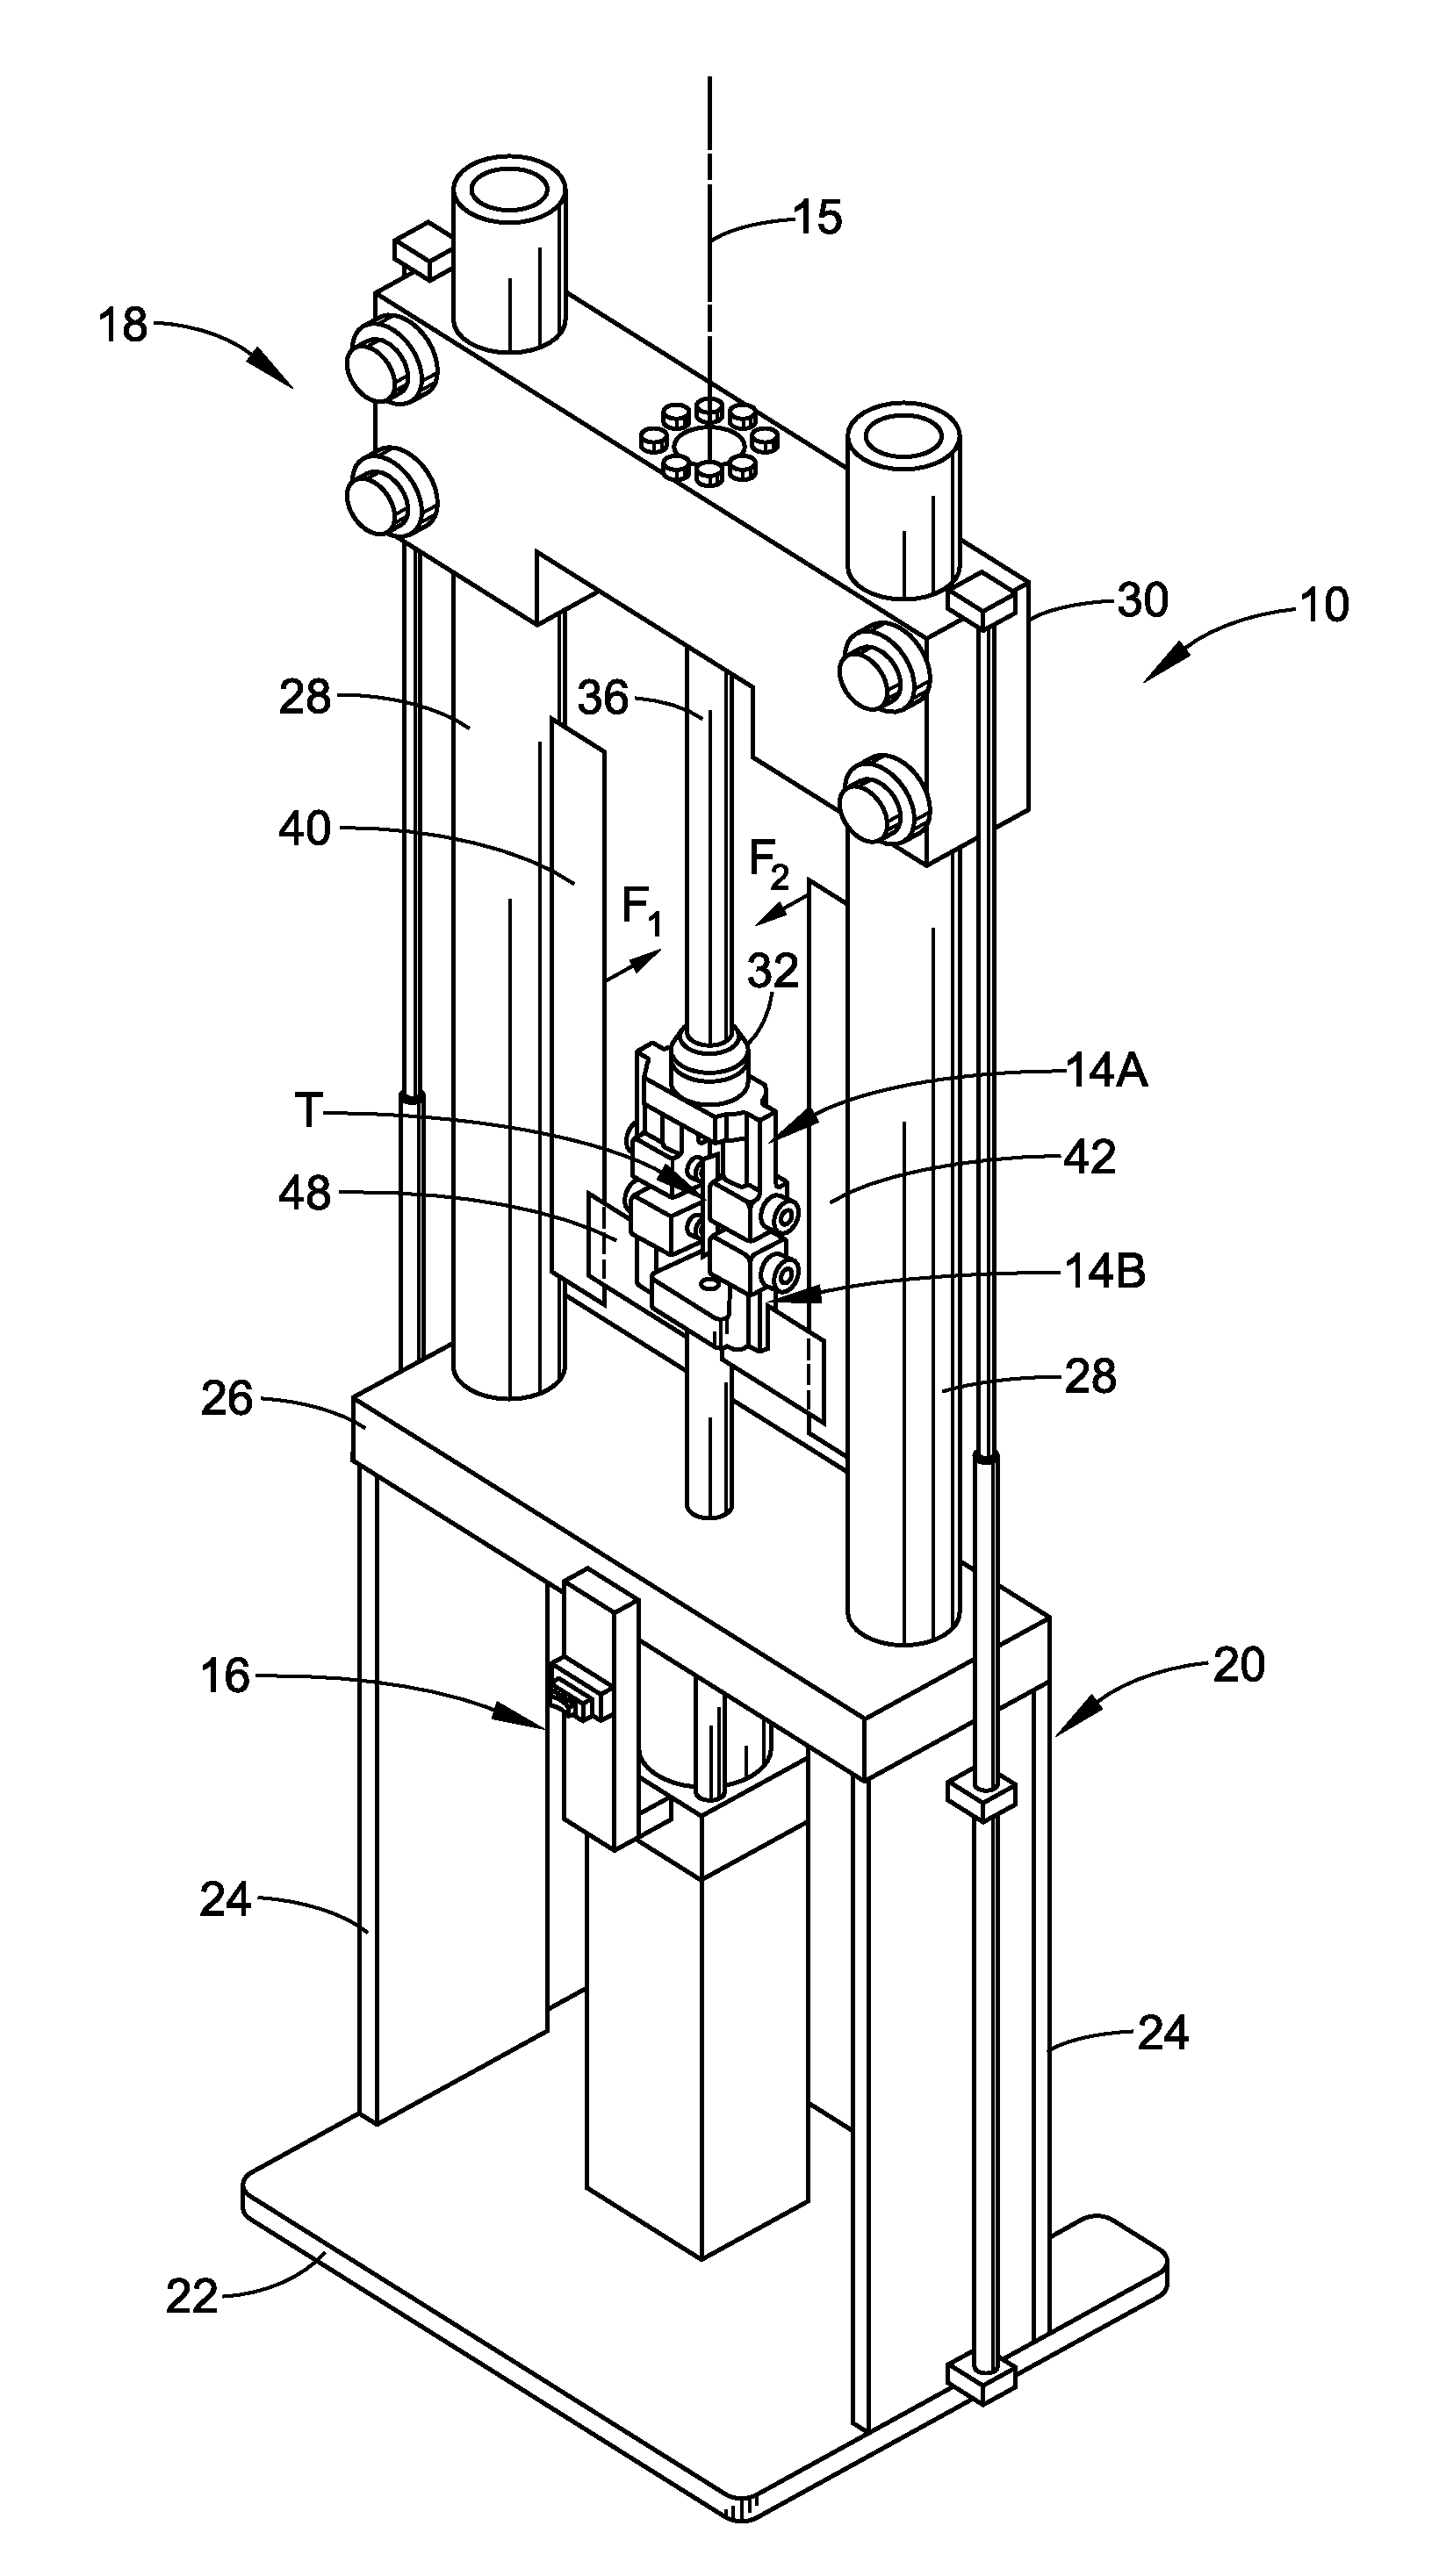 Electromagnetic rotation and stability apparatus